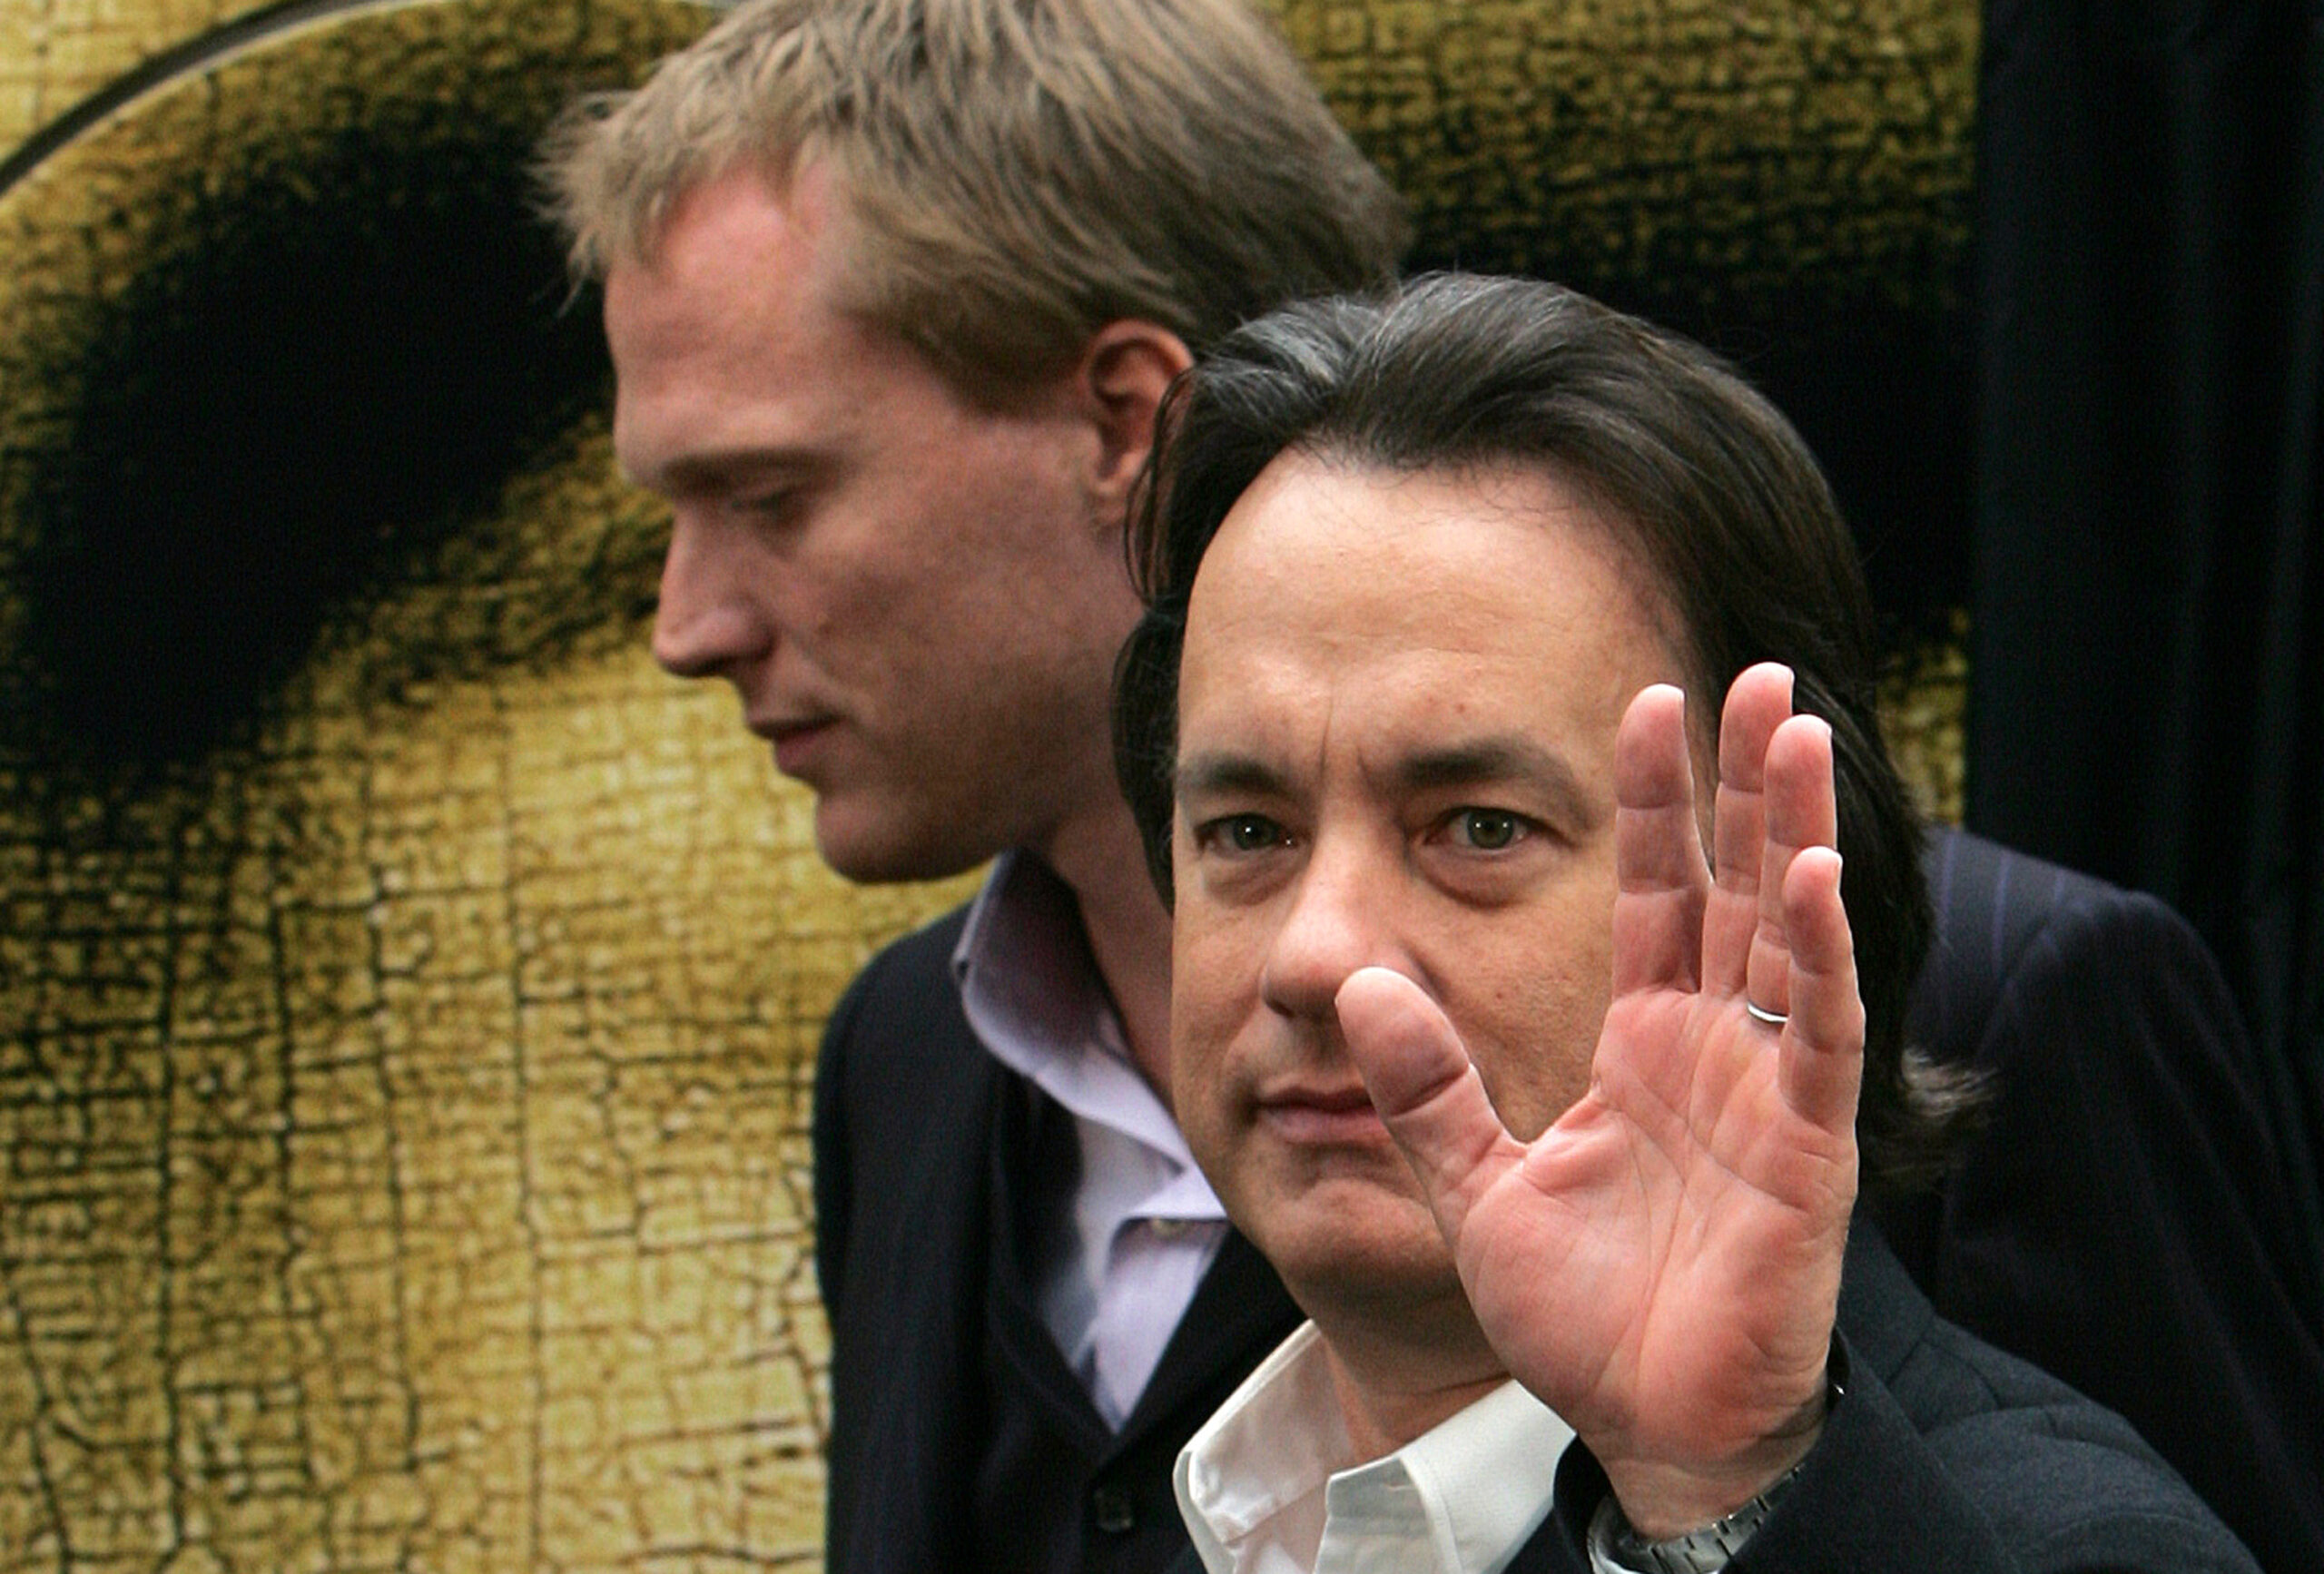 Actor Tom Hanks waves with actor Paul Betteny in the background